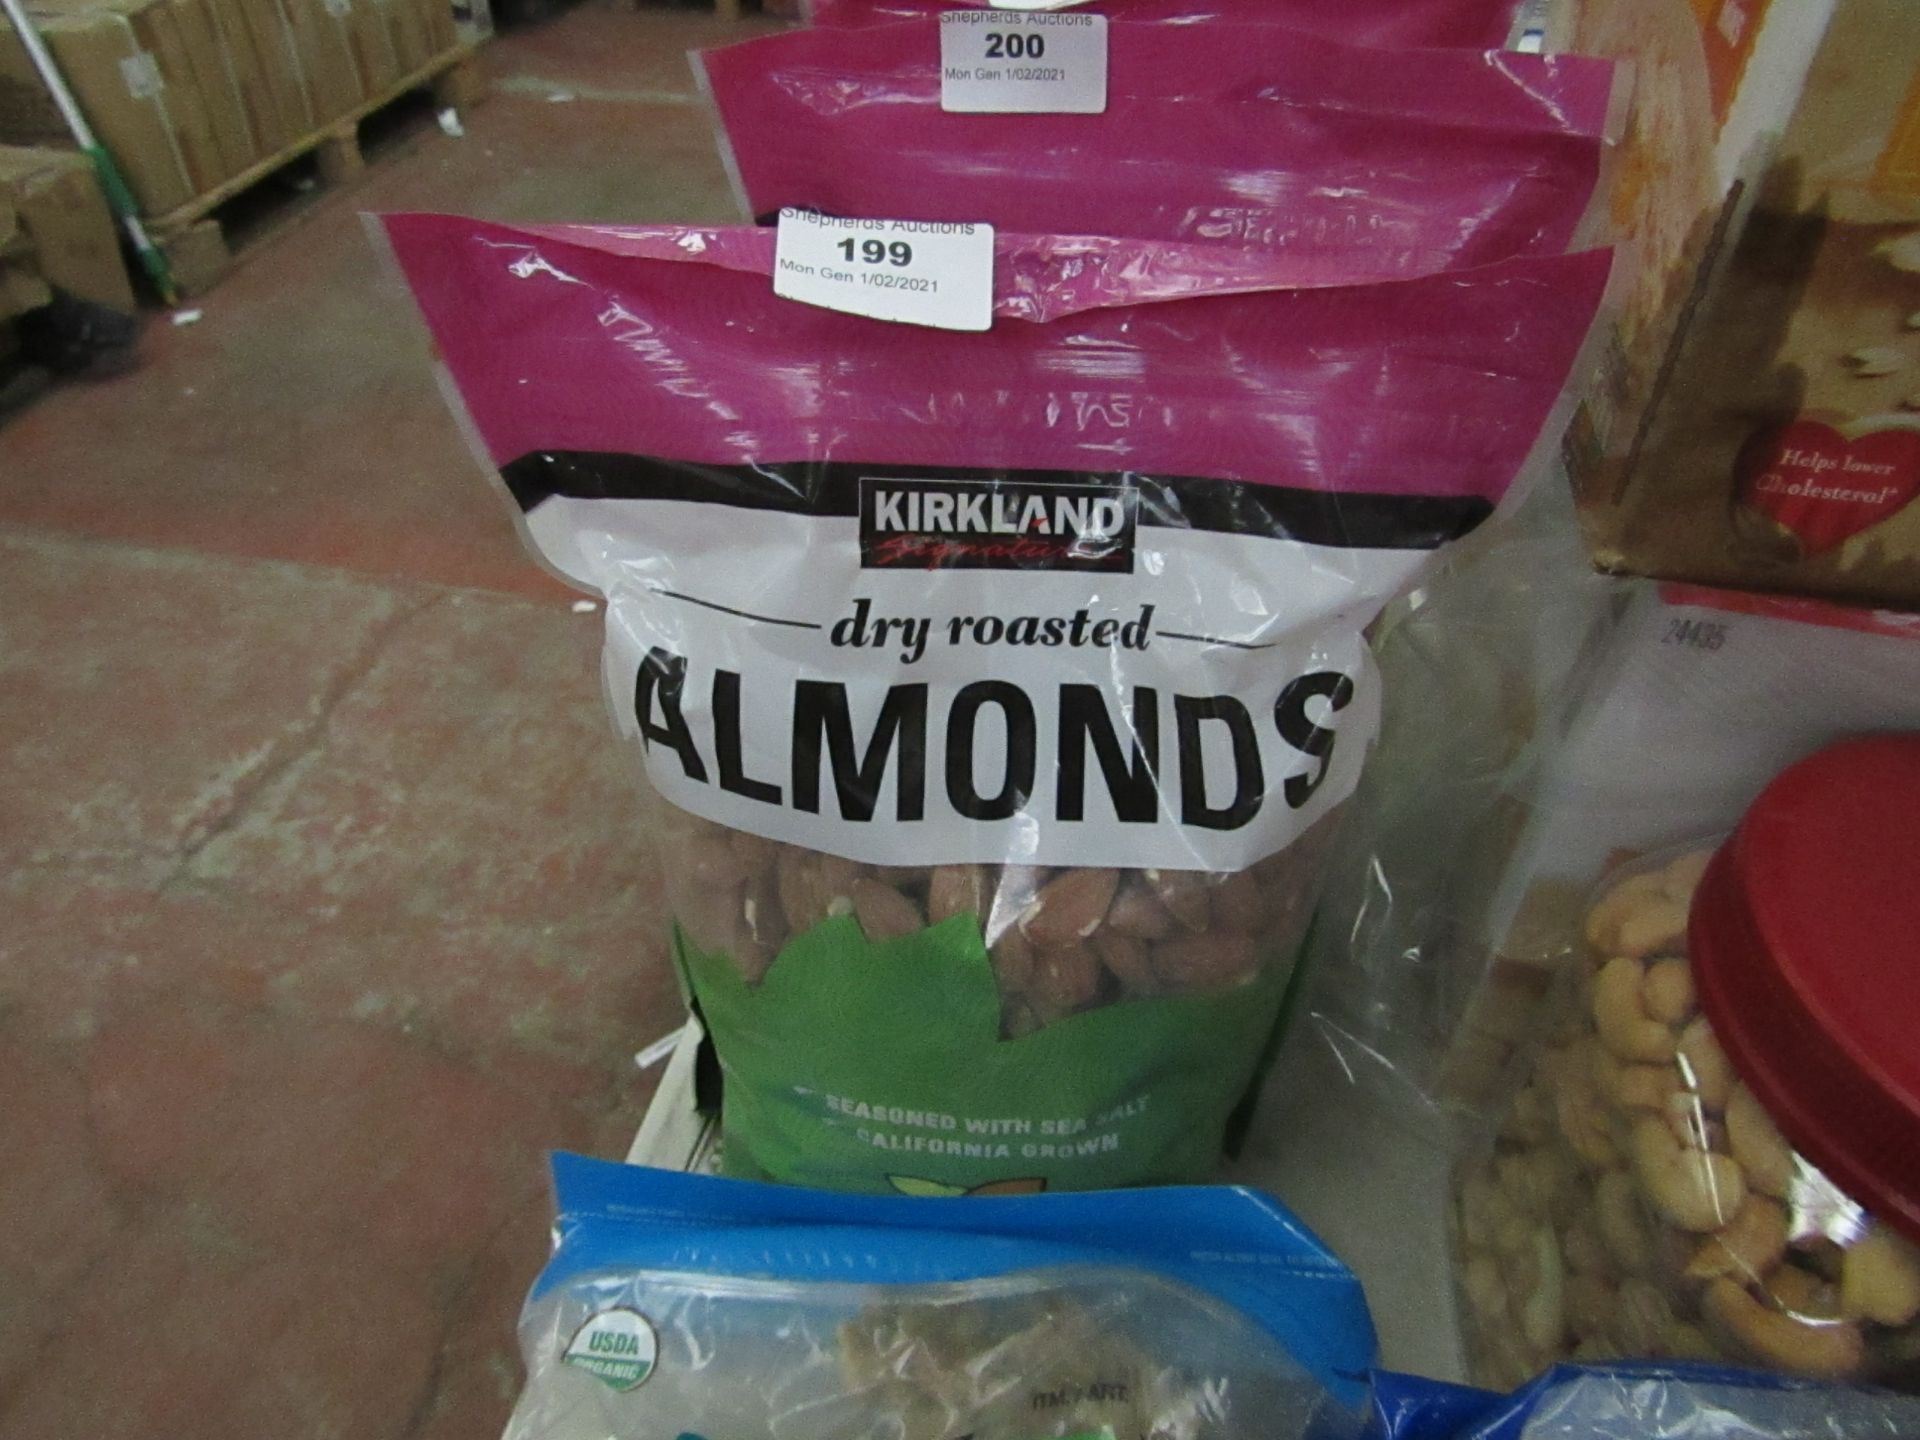 Dry roasted almonds, New and Packaged, 1.13kg, 31/07/21, Kirkland Signature